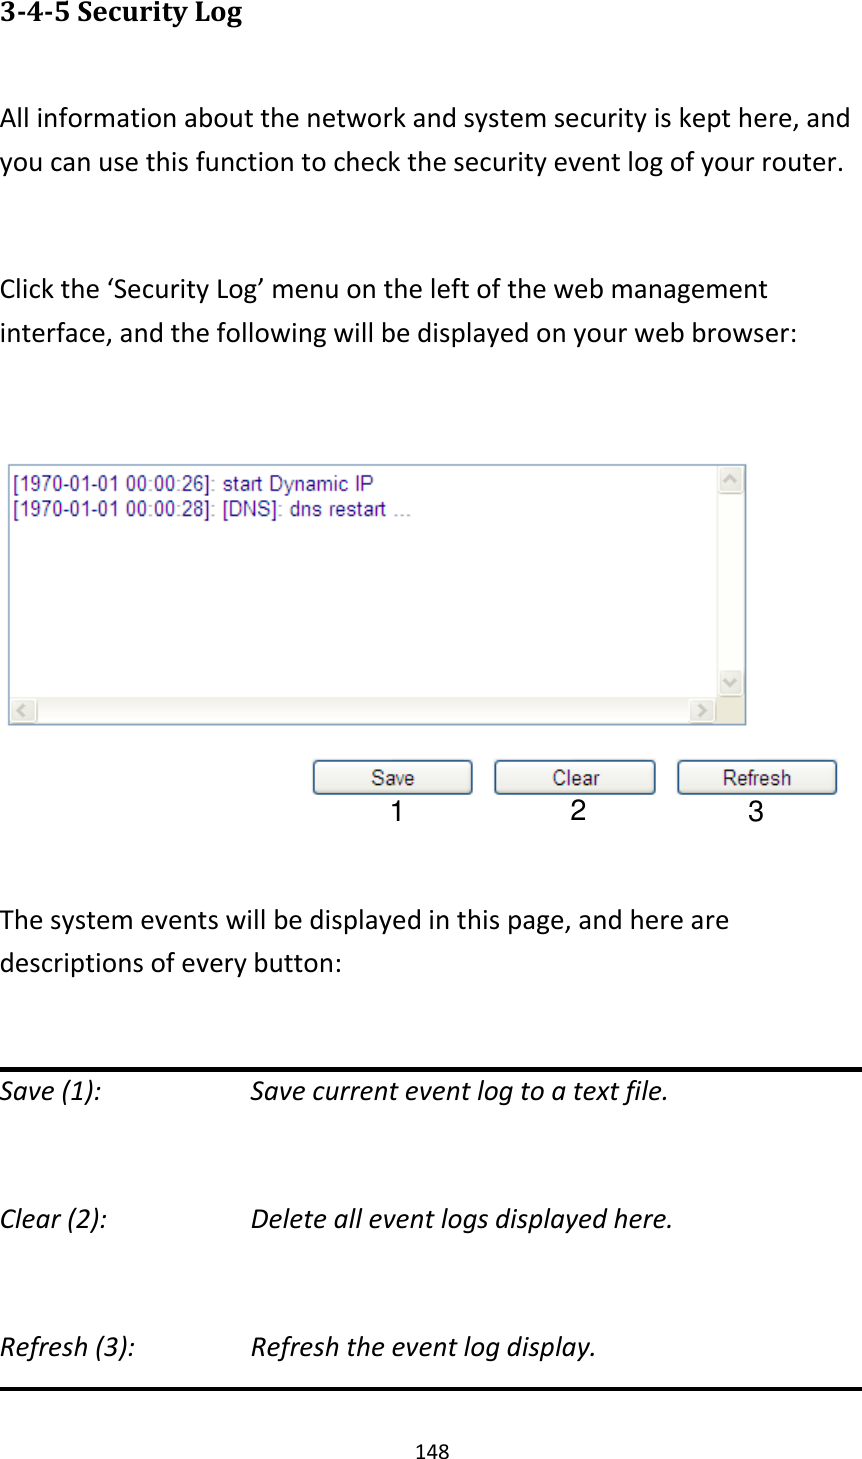 148 3-4-5 Security Log  All information about the network and system security is kept here, and you can use this function to check the security event log of your router.  Click the ‘Security Log’ menu on the left of the web management interface, and the following will be displayed on your web browser:    The system events will be displayed in this page, and here are descriptions of every button:  Save (1):        Save current event log to a text file.  Clear (2):        Delete all event logs displayed here.  Refresh (3):         Refresh the event log display.  1 2 3 